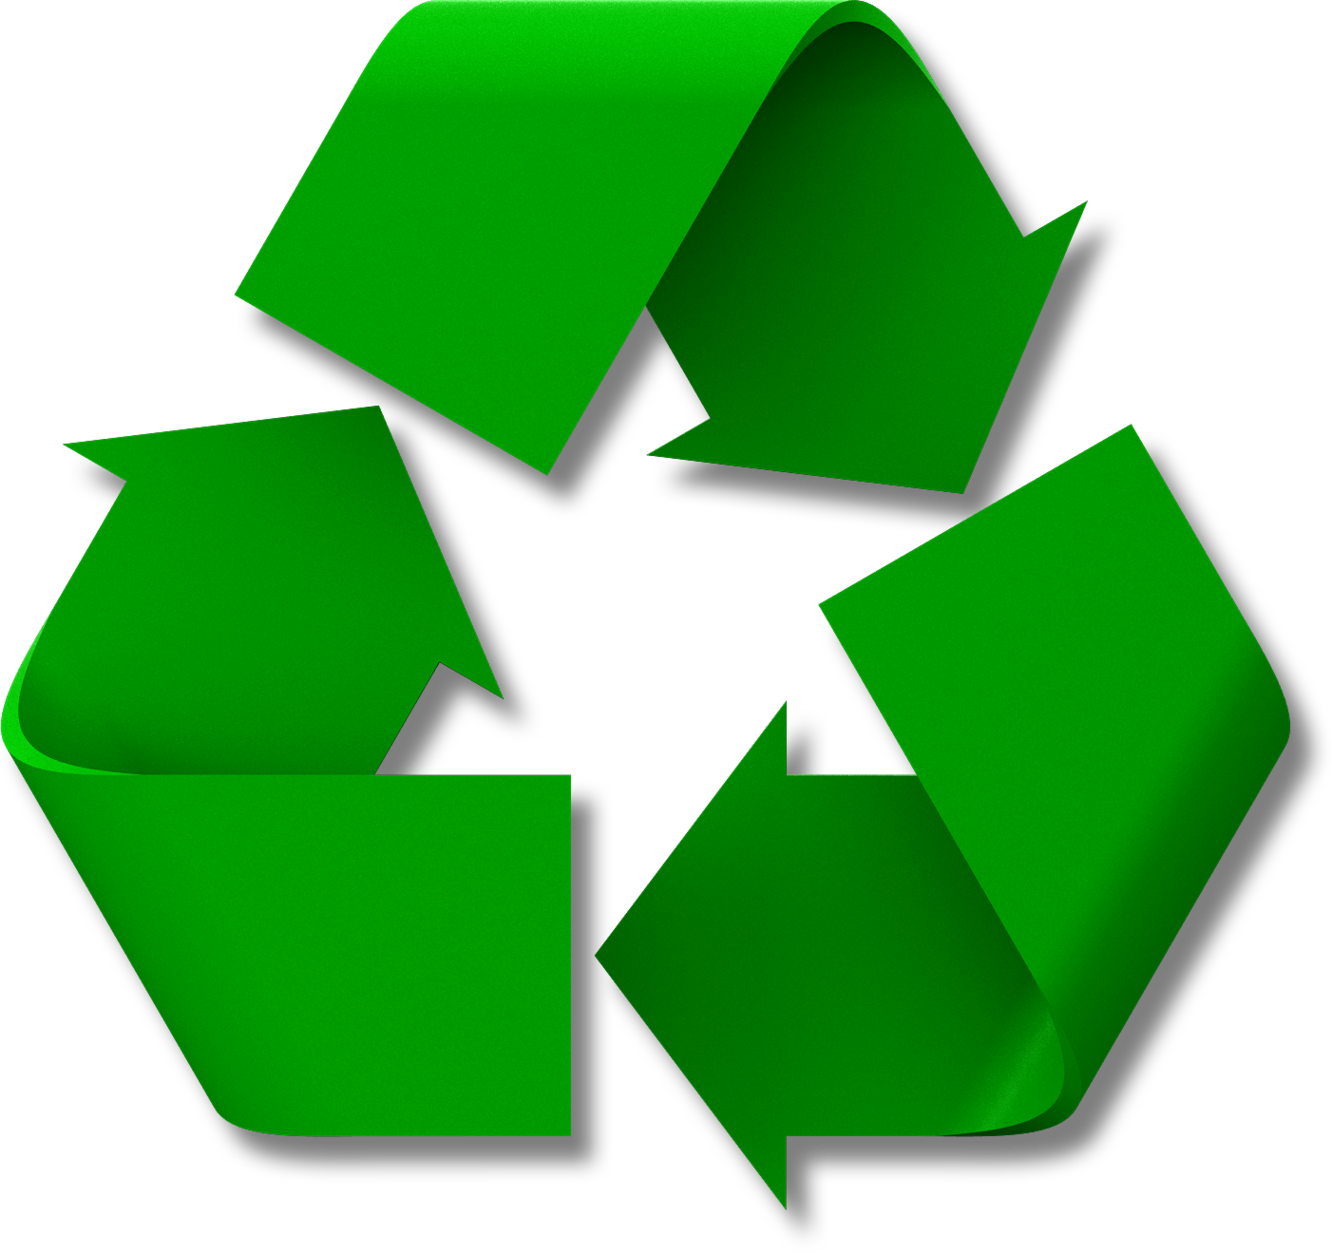 Logos For > Recycle Symbol Png Clipart - Free to use Clip Art Resource